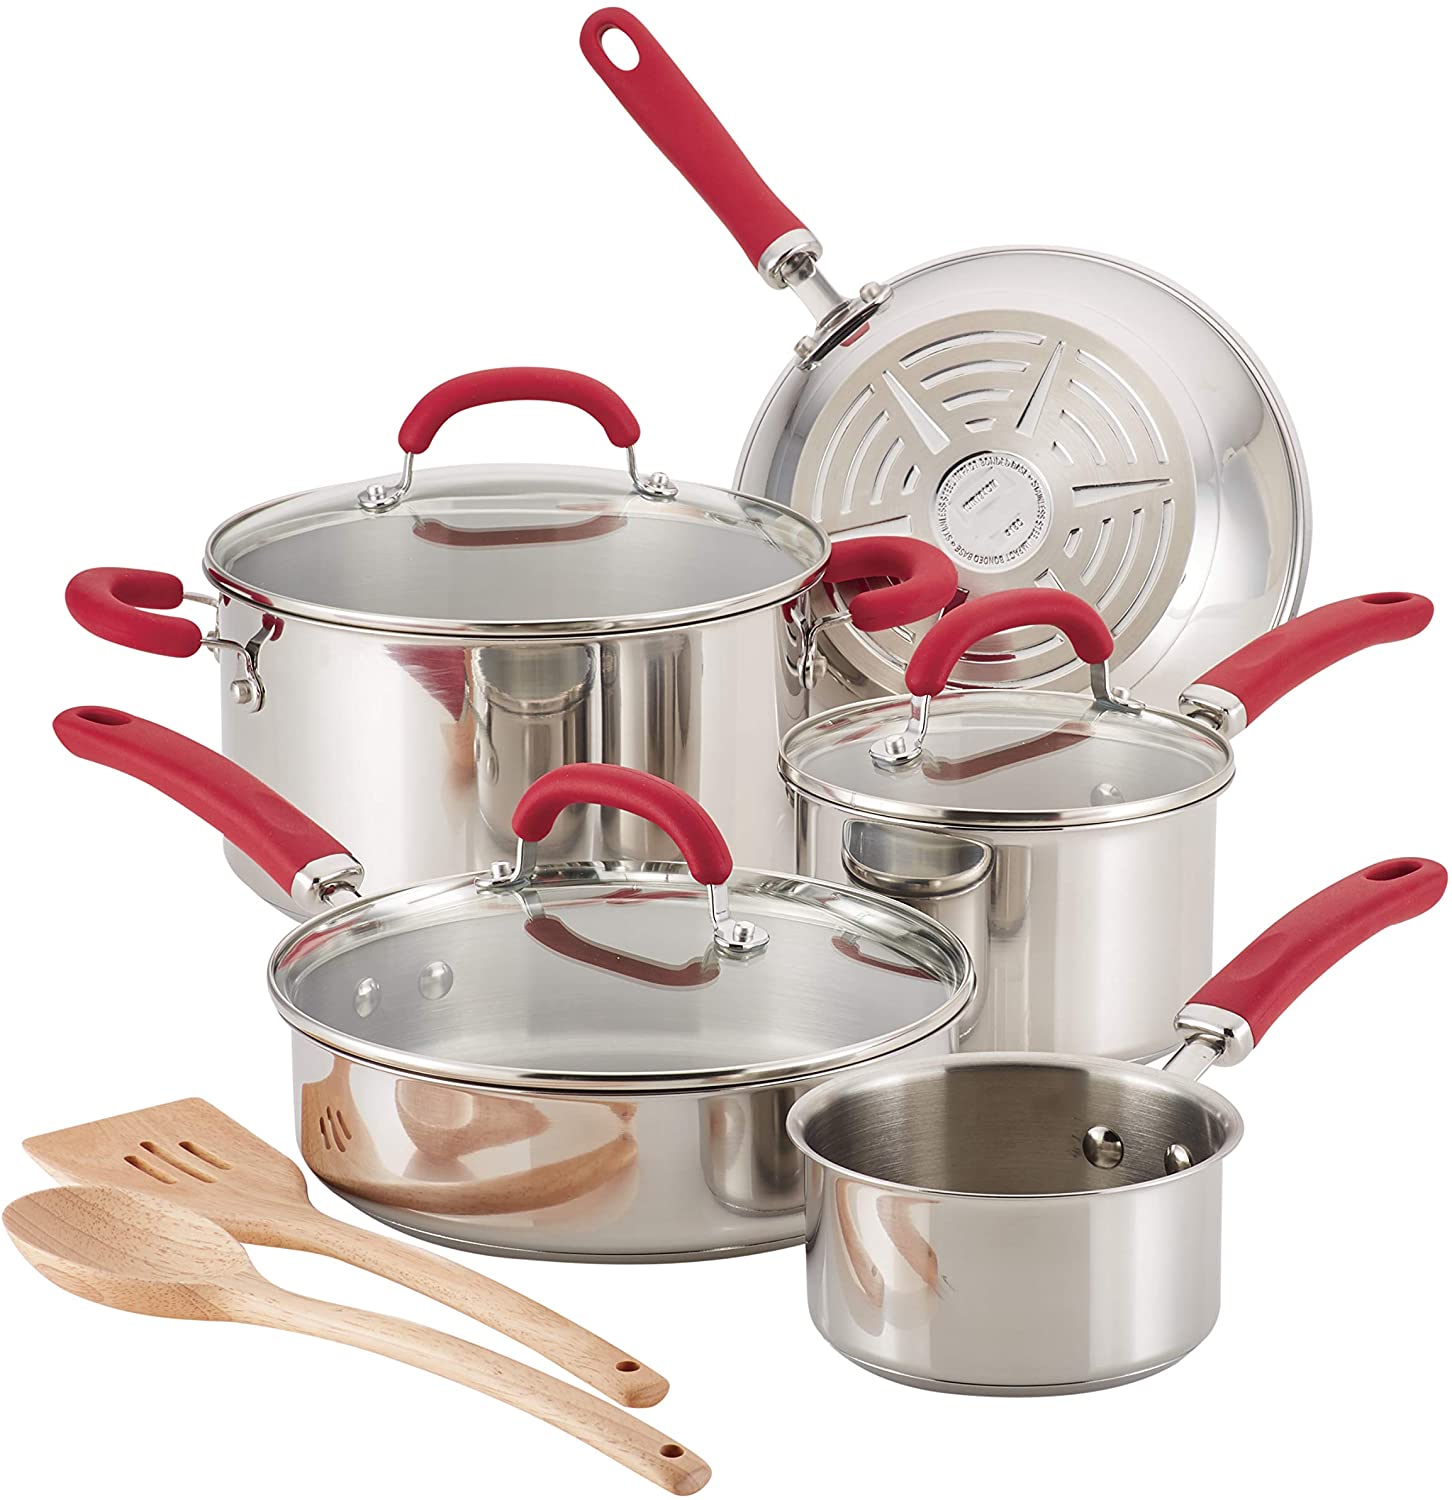 Rachael Ray Create Delicious 10 Piece Stainless Steel Cookware Set, Stainless Steel with Red Handles